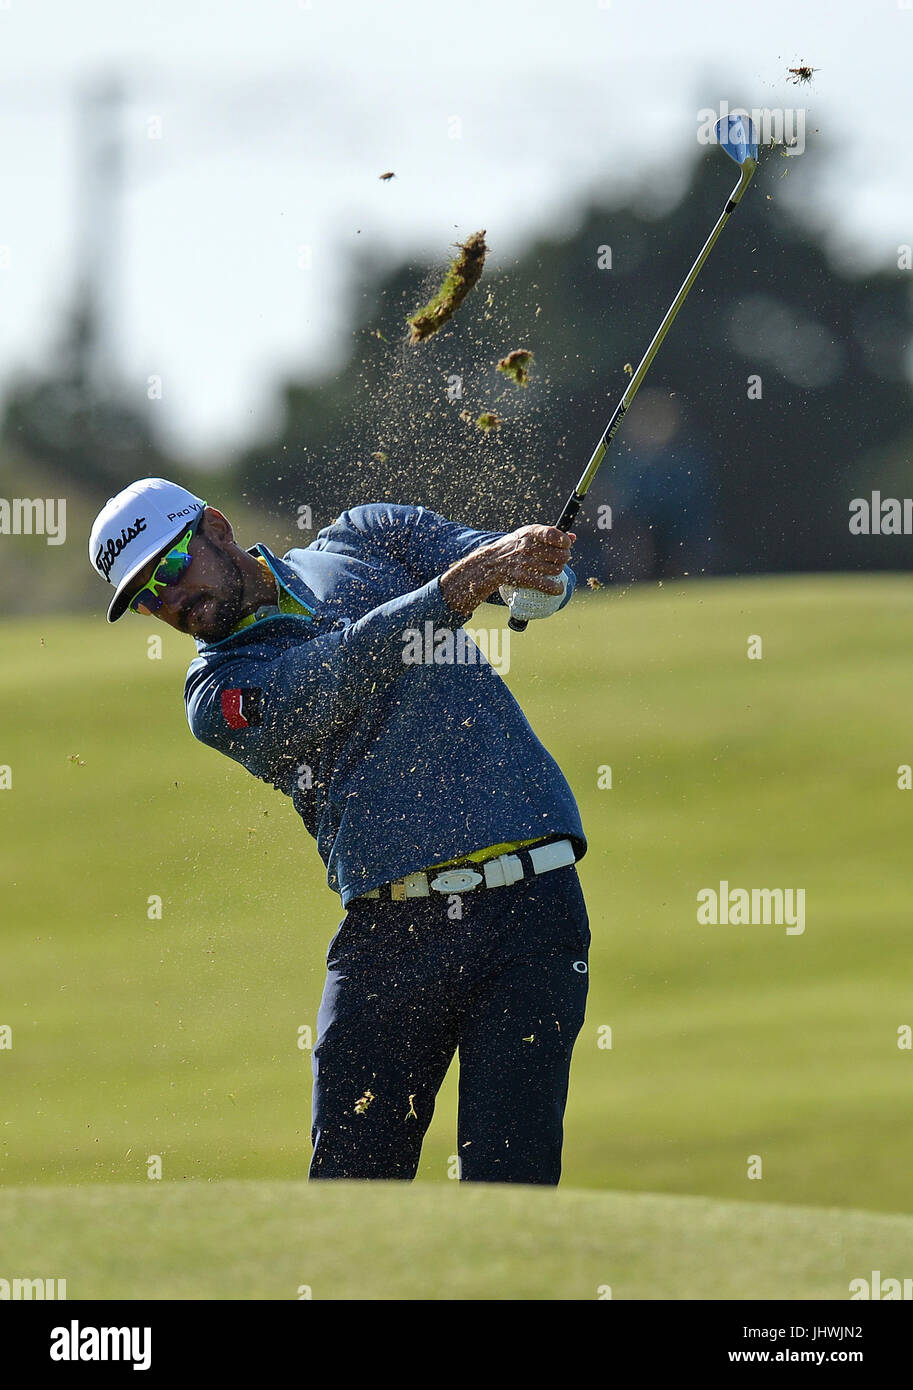 Spain's Rafa Cabrera Bello, winner of the Aberdeen Asset Management Scottish Open, plays his second shot to the 17th during day four of the 2017 Aberdeen Asset Management Scottish Open at Dundonald Links, Troon. Stock Photo